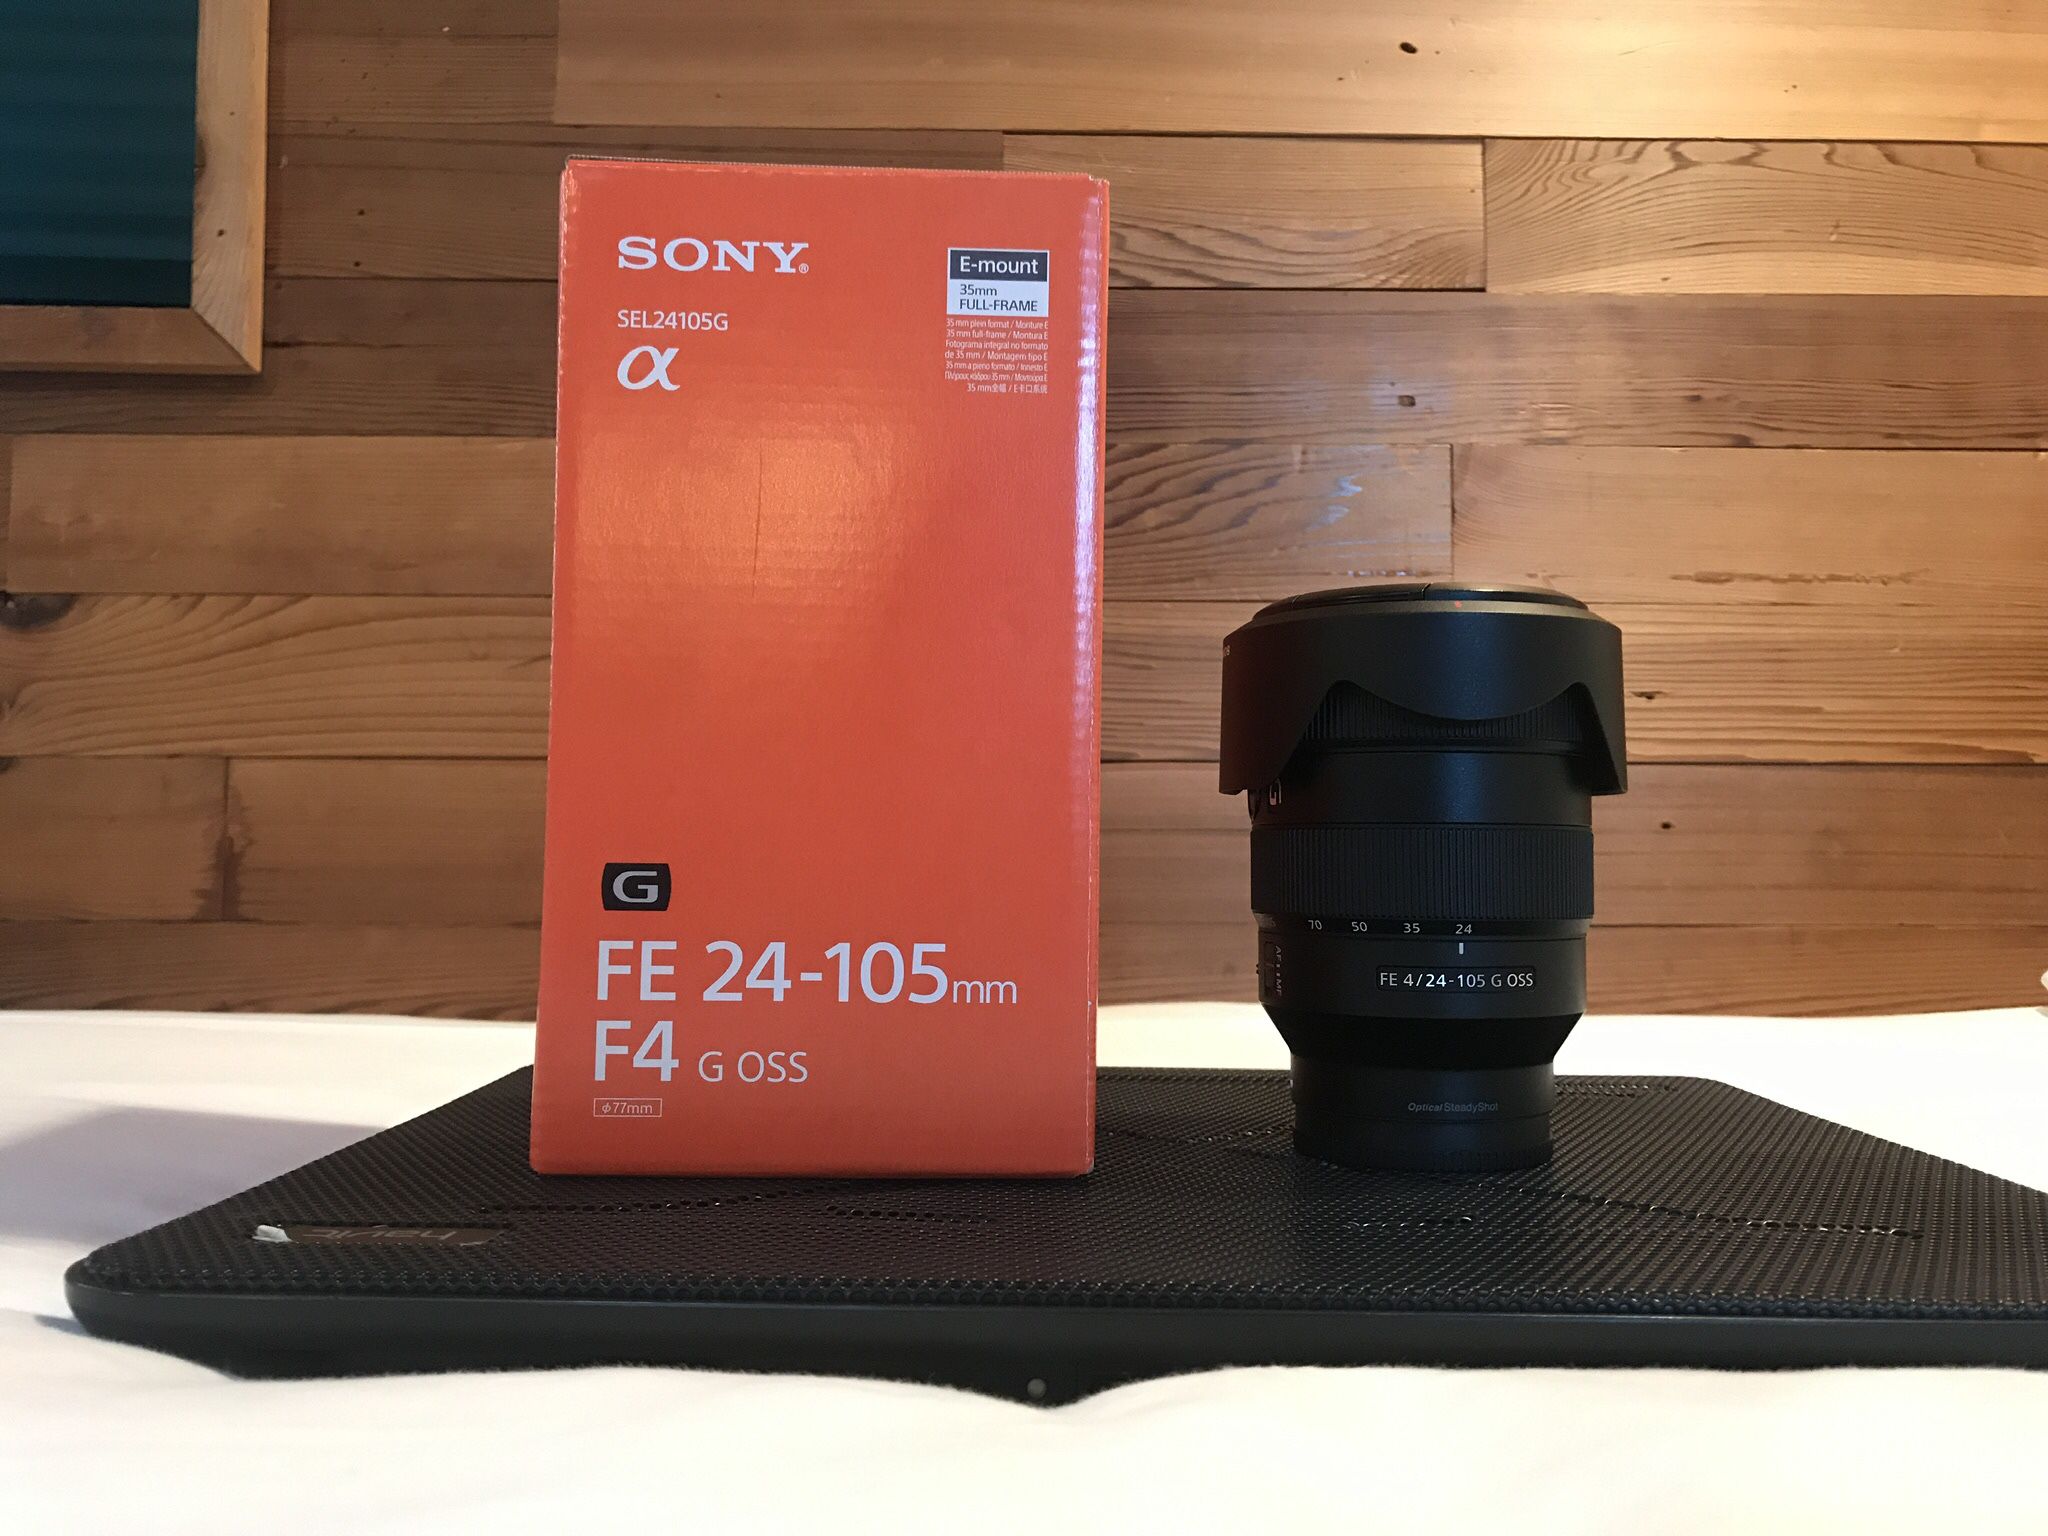 Sony 24-105 F4 G OSS Lens for Sale in Encinitas, CA - OfferUp